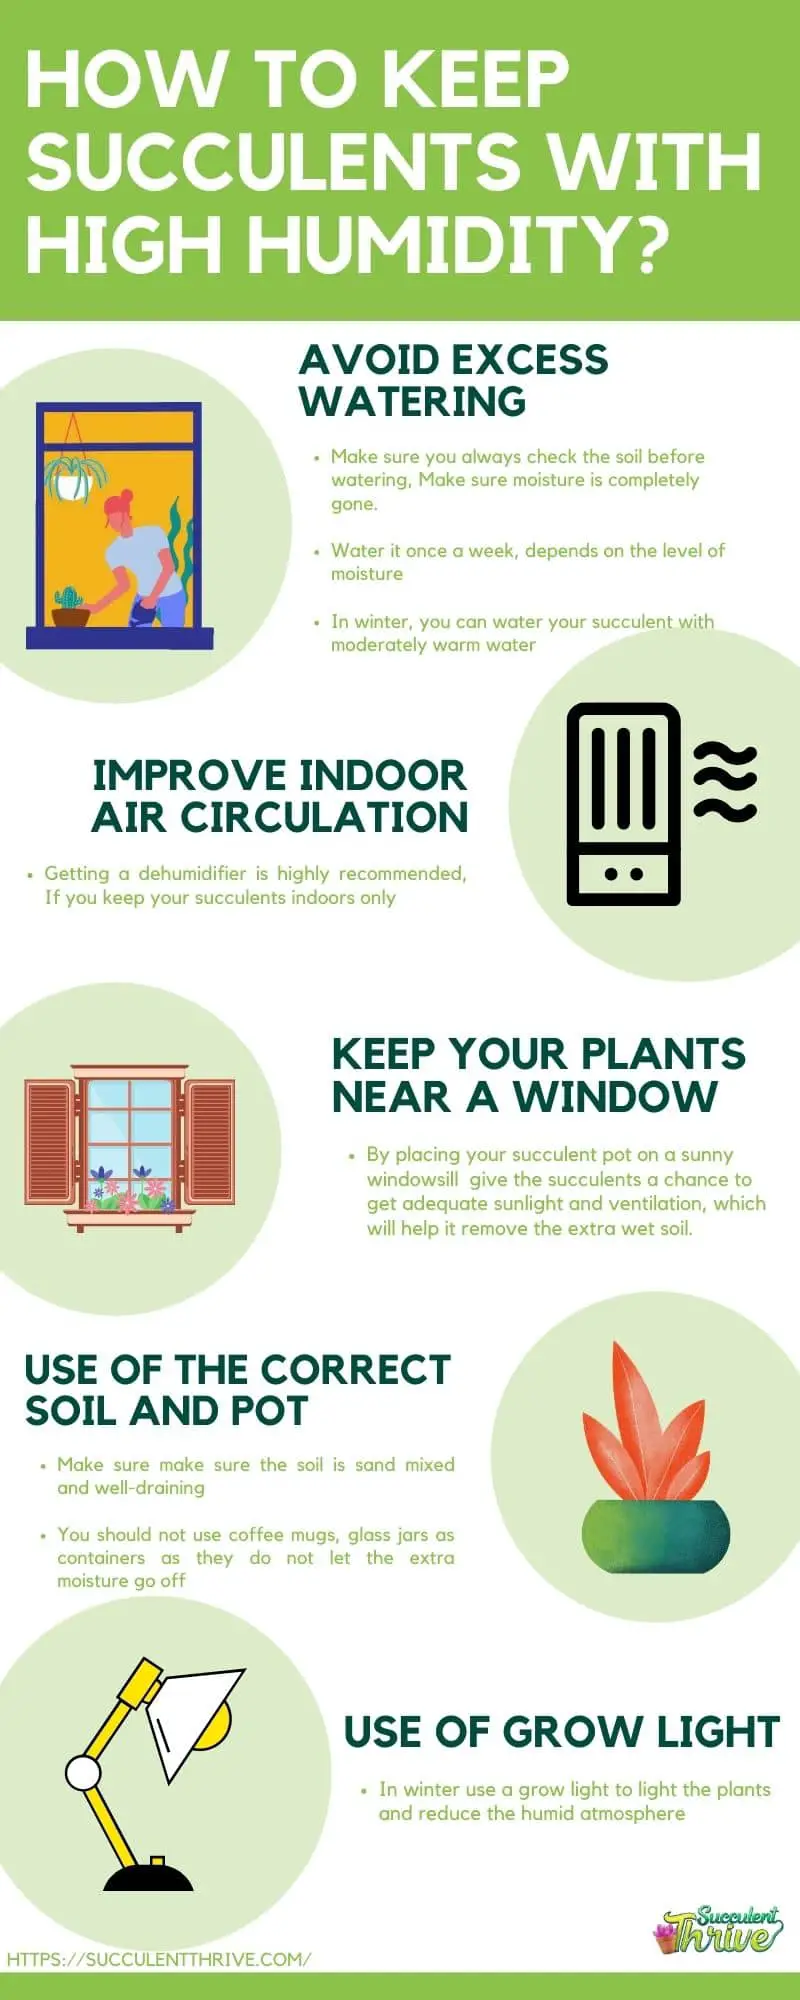 How to keep succulents with high humidity OR in a humid climate Infographic